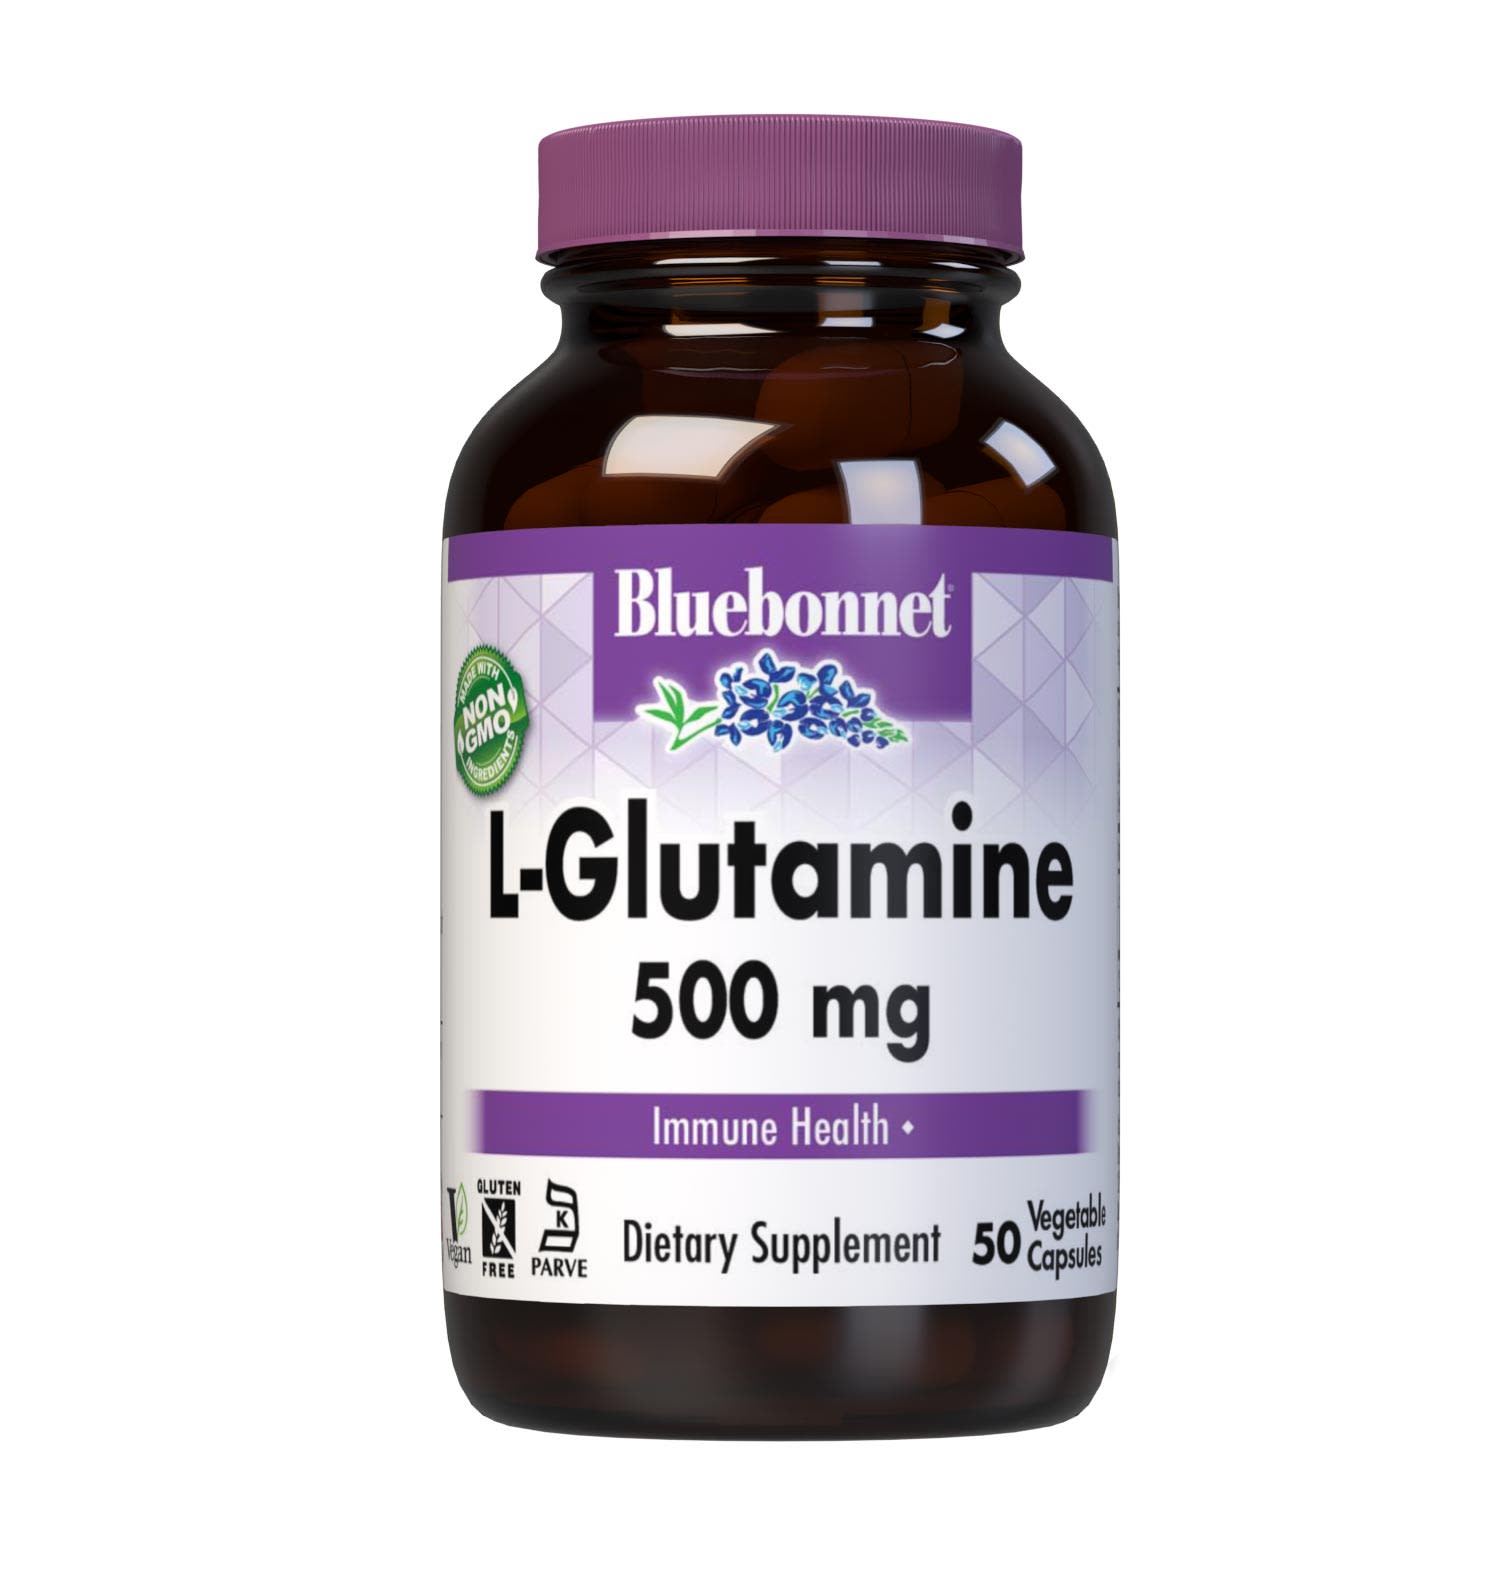 Bluebonnet’s L-Glutamine 500 mg 50 vegetable capsules are formulated with the free-form amino acid L-glutamine in its crystalline form from Ajinomoto to help support immune function. #size_50 count